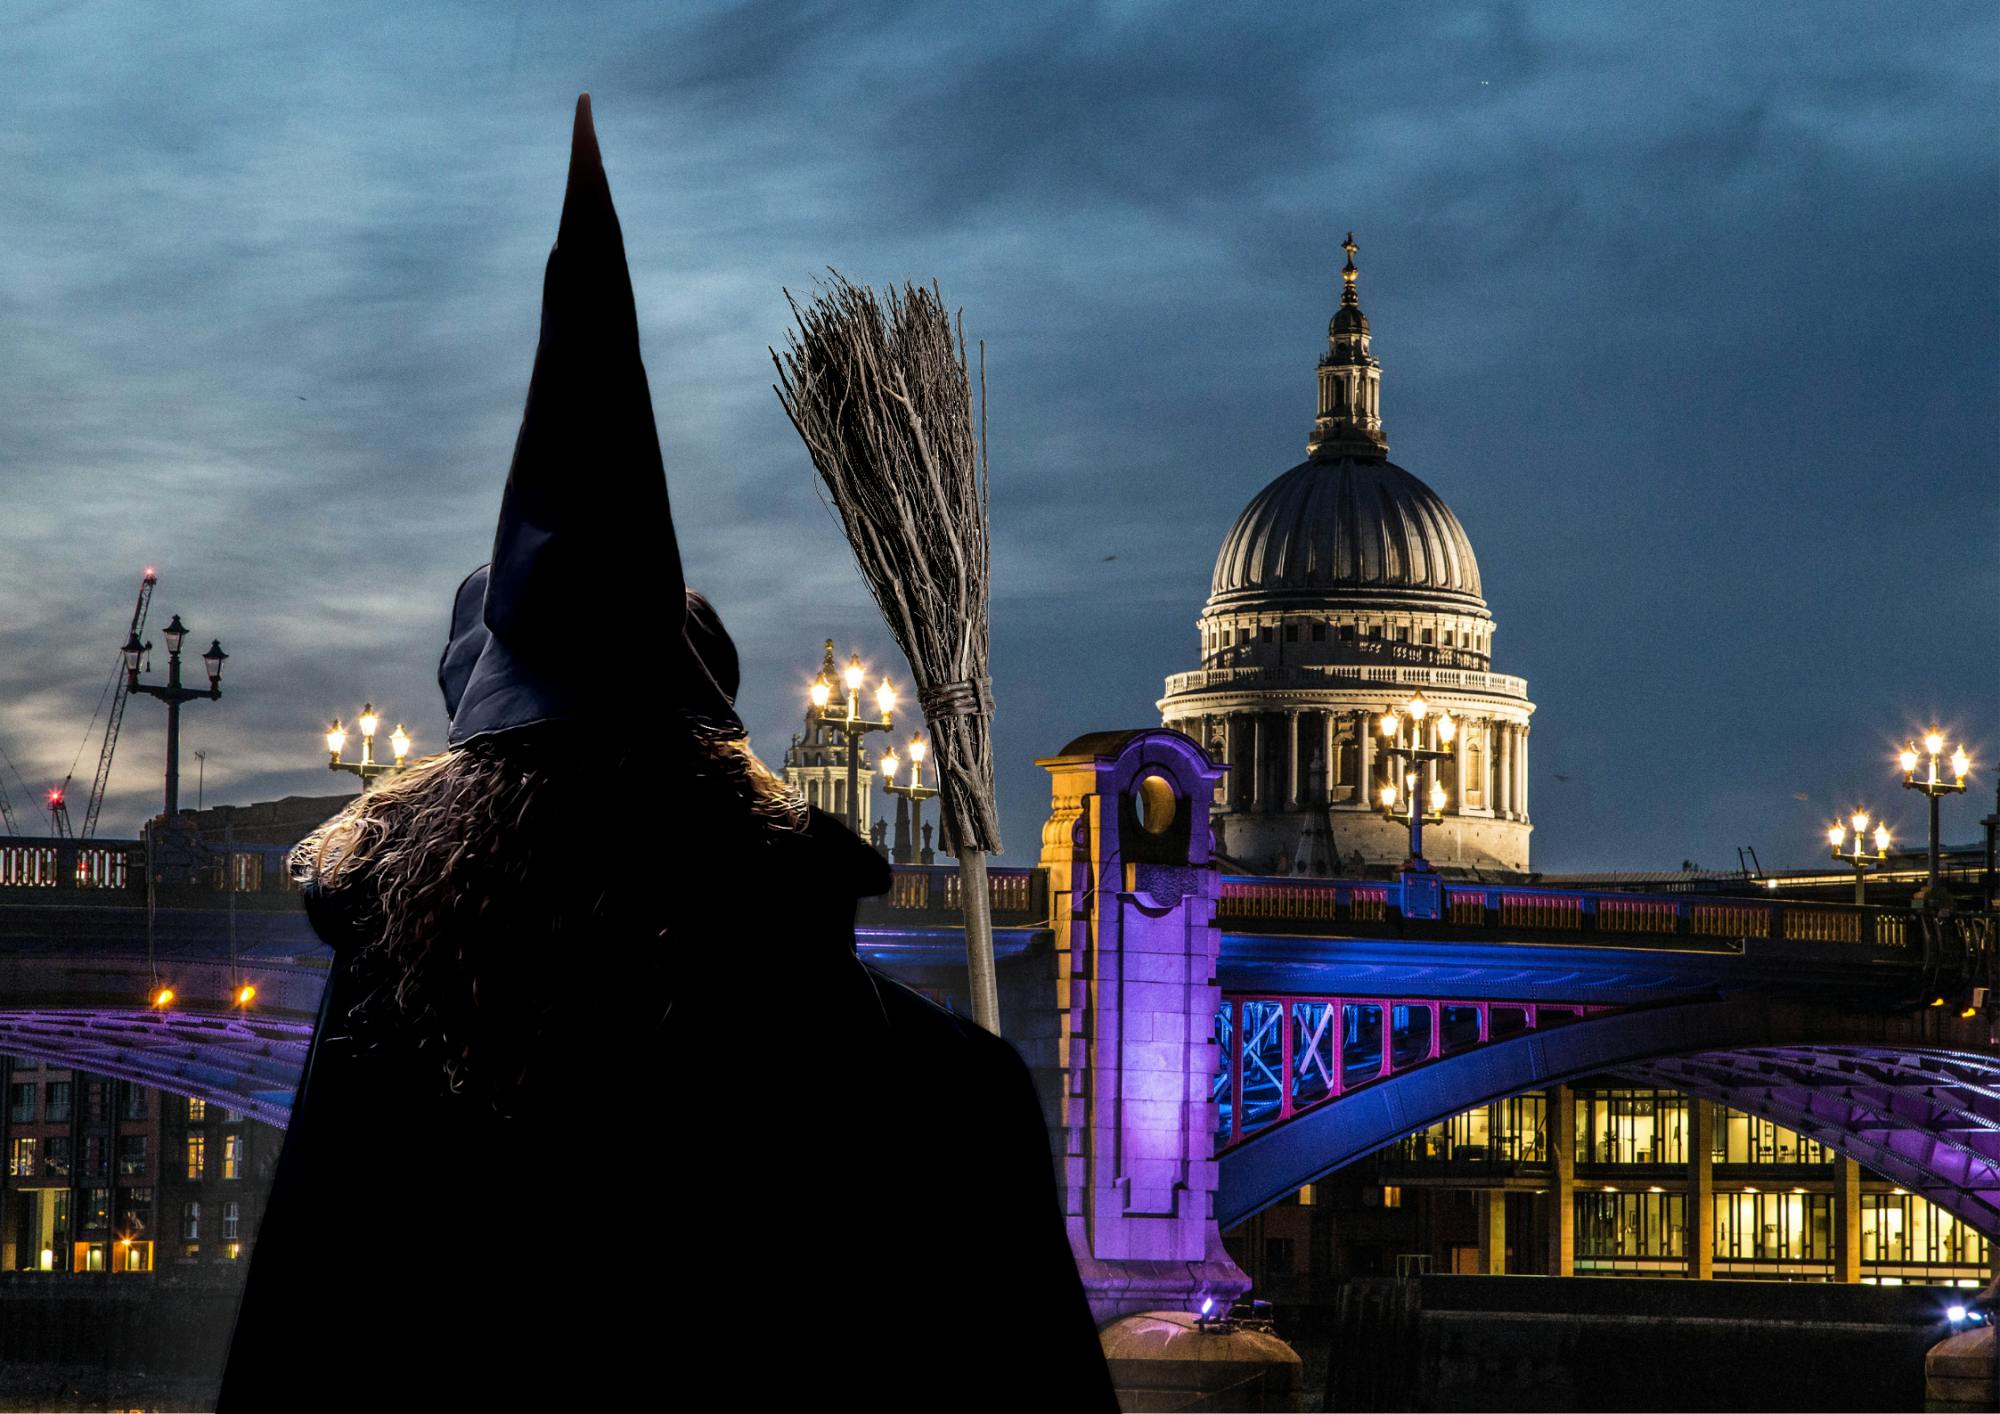 London witches and history walking tour